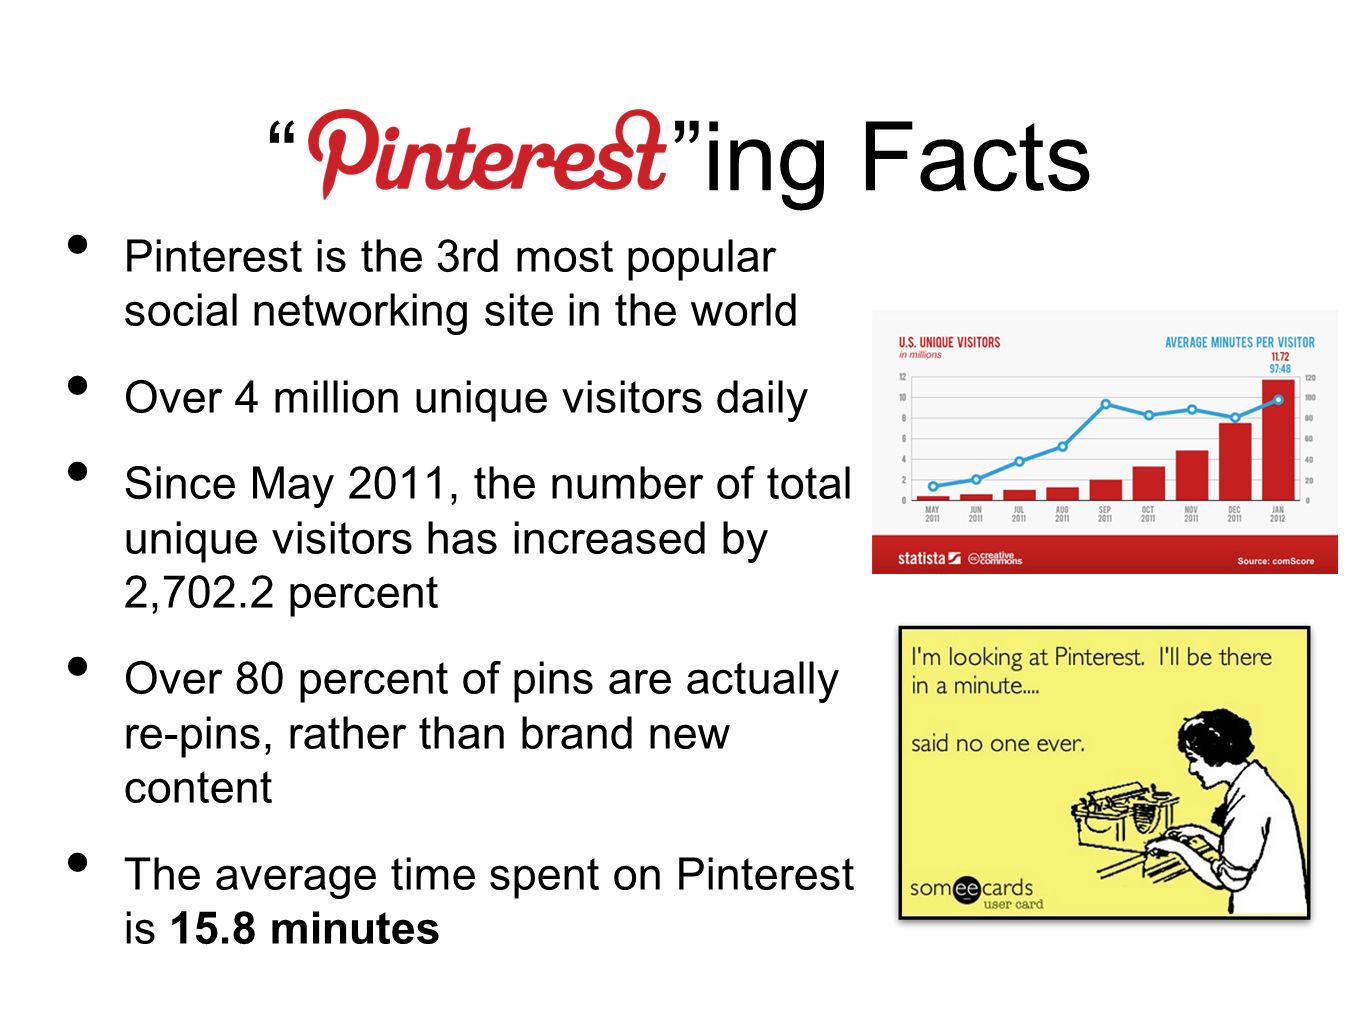 ing Facts Pinterest is the 3rd most popular social networking site in the world Over 4 million unique visitors daily Since May 2011, the number of total unique visitors has increased by 2,702.2 percent Over 80 percent of pins are actually re-pins, rather than brand new content The average time spent on Pinterest is 15.8 minutes